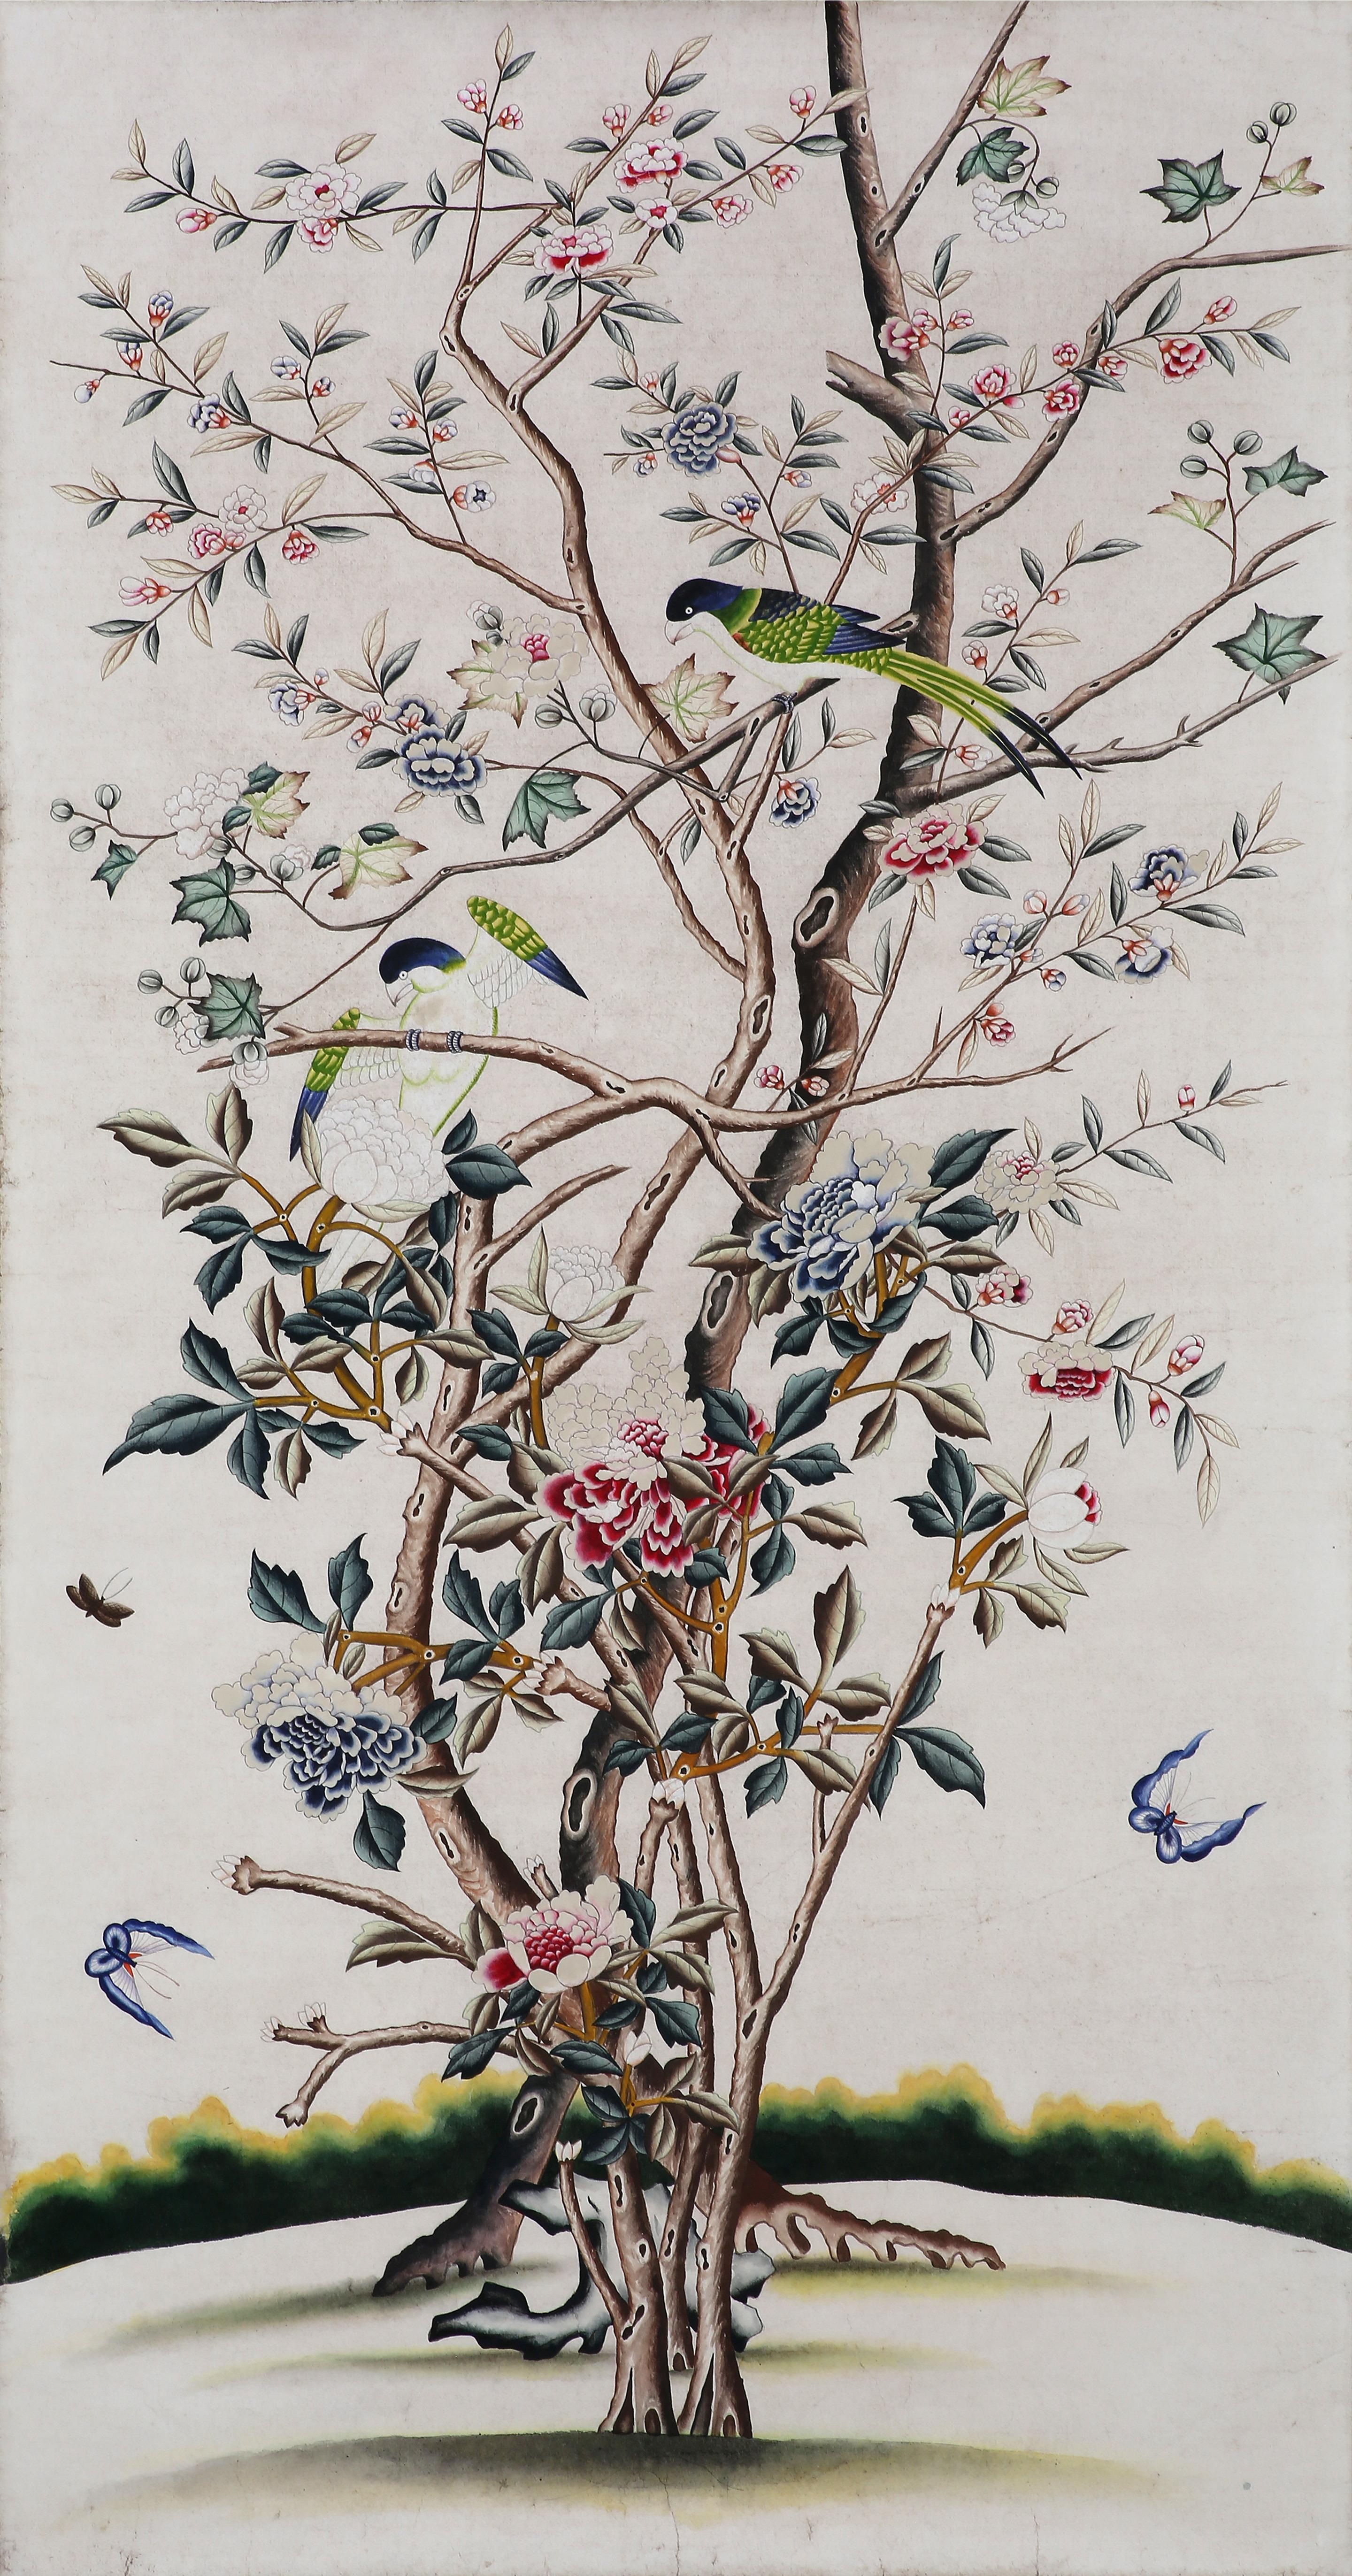 The fine pair of wallpaper panels hand painted in watercolor on rice paper, reproducing the 19th-century Chinese export Chinoiserie painting of floral and bird motif on export wallpaper, from our studio. An antiquing process is applied to the panels